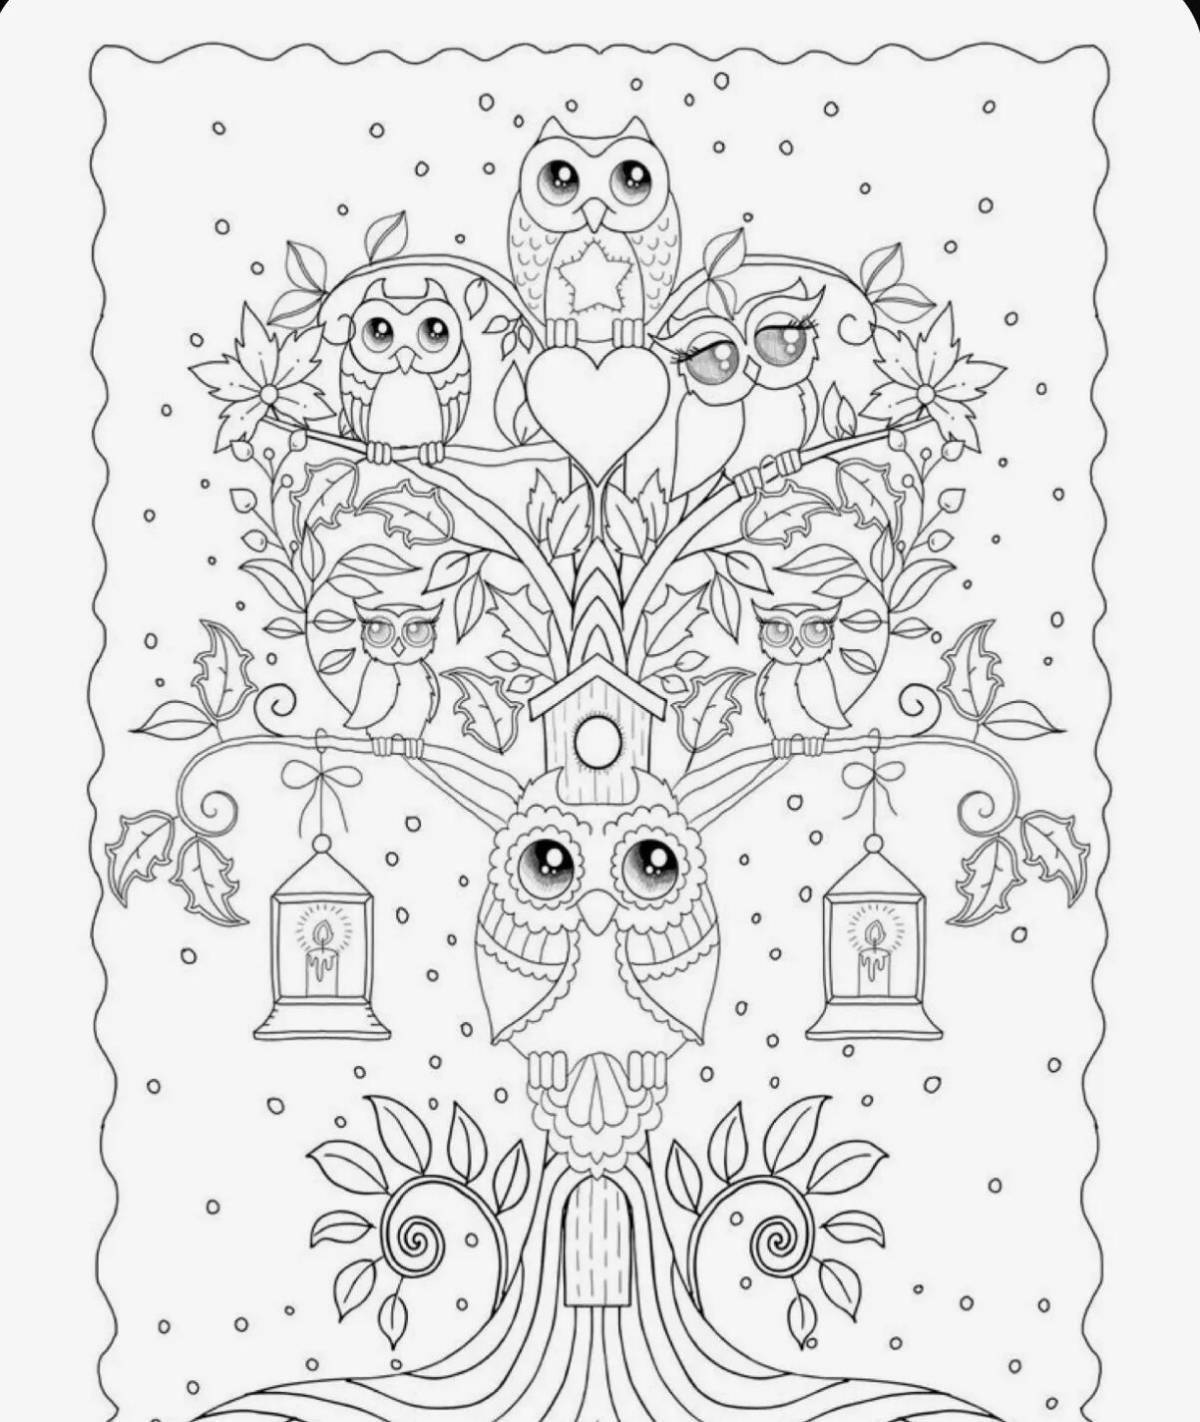 Coloring book wild anti-stress owls